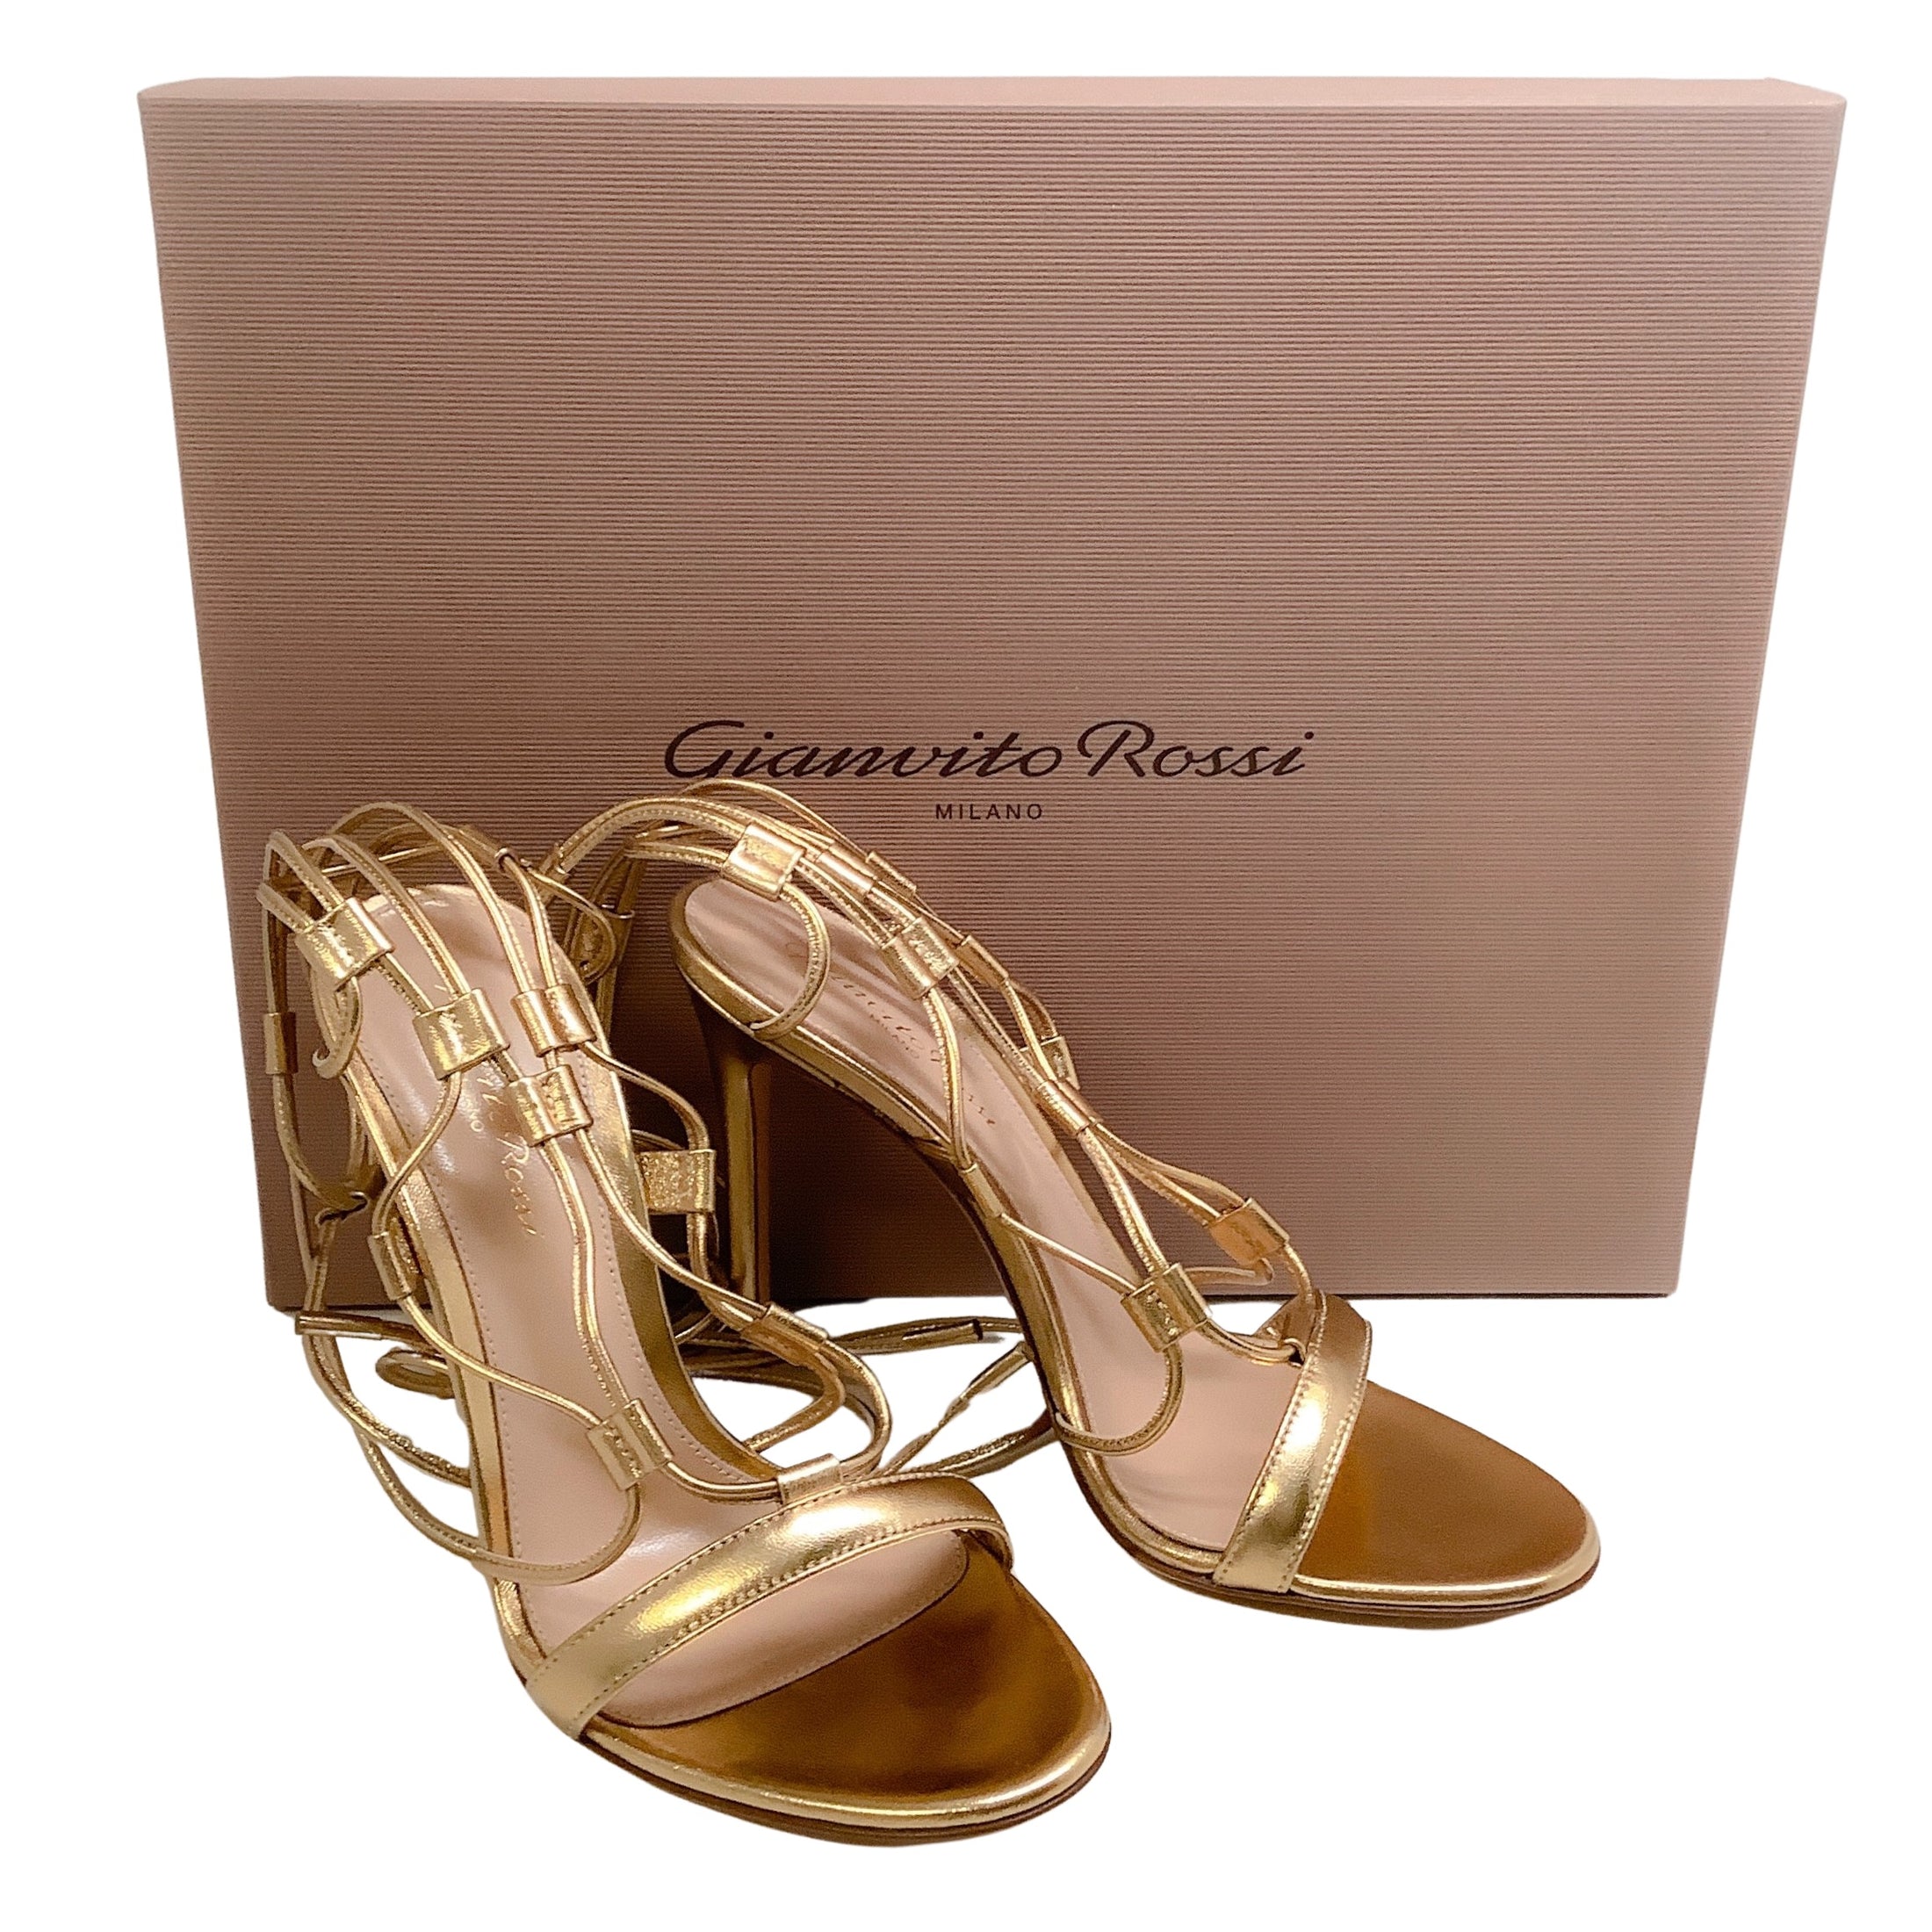 Gianvito Rossi Mekong Gold Giza Ankle Wrap Sandals